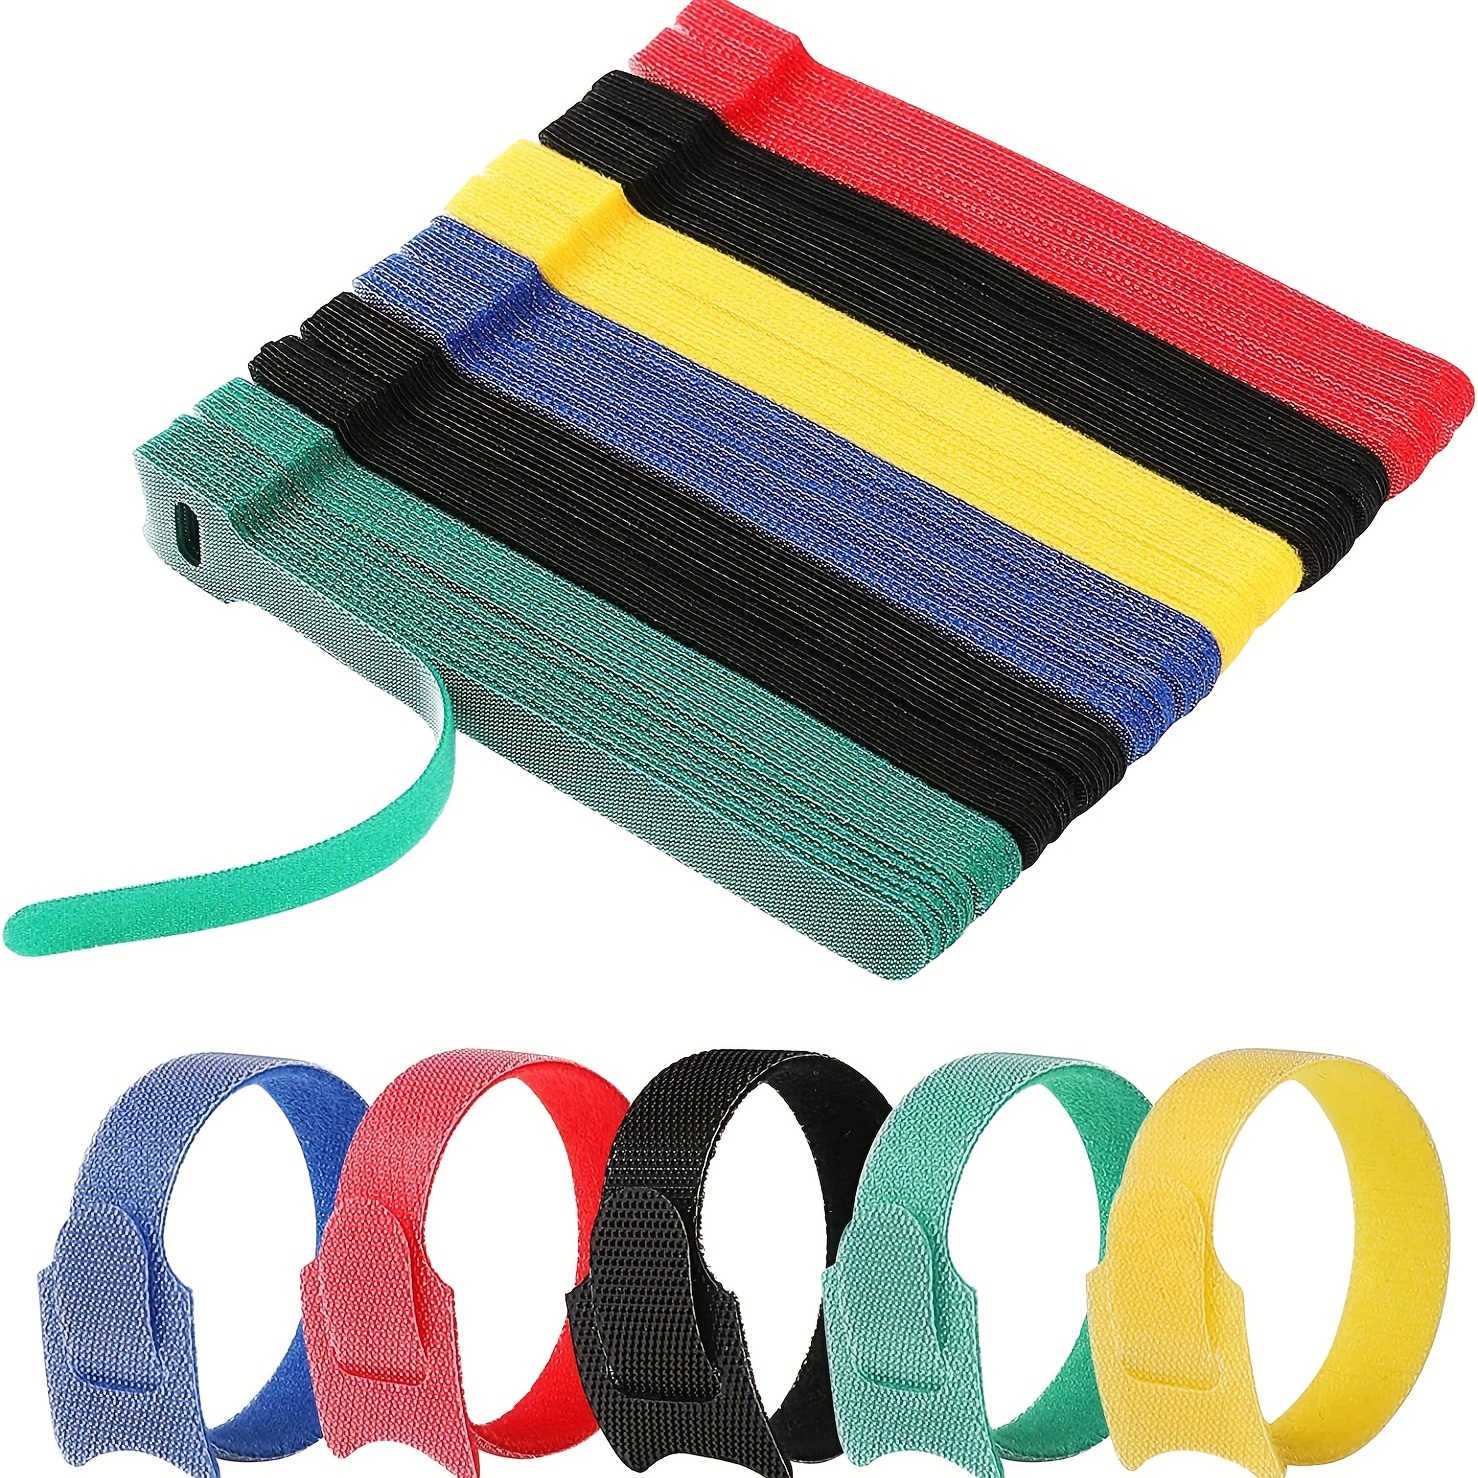 60PCS Reusable Cable Ties, Travel Wire & Cord Straps Organizer